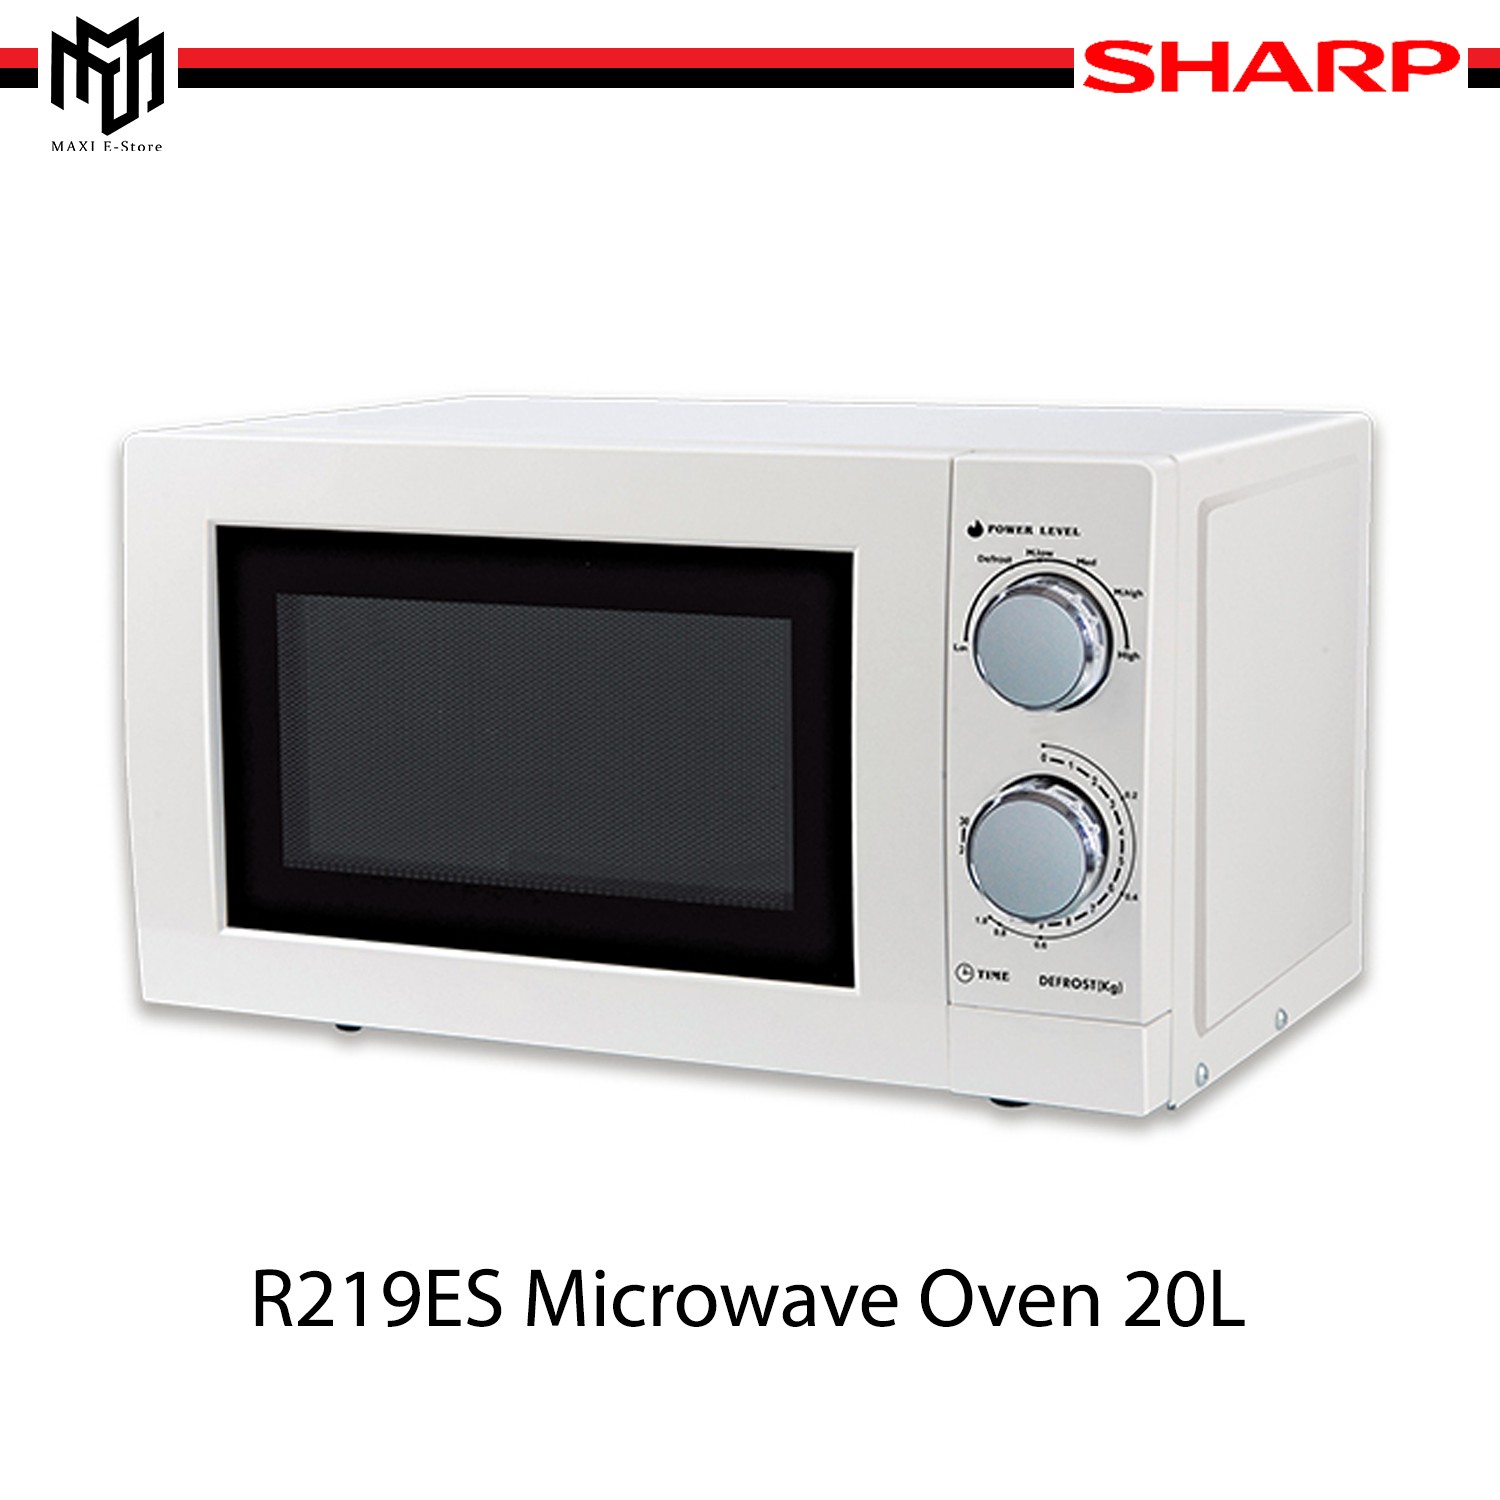 Sharp R219ES Microwave Oven 20L 700W 2Way Defrost Shopee Malaysia